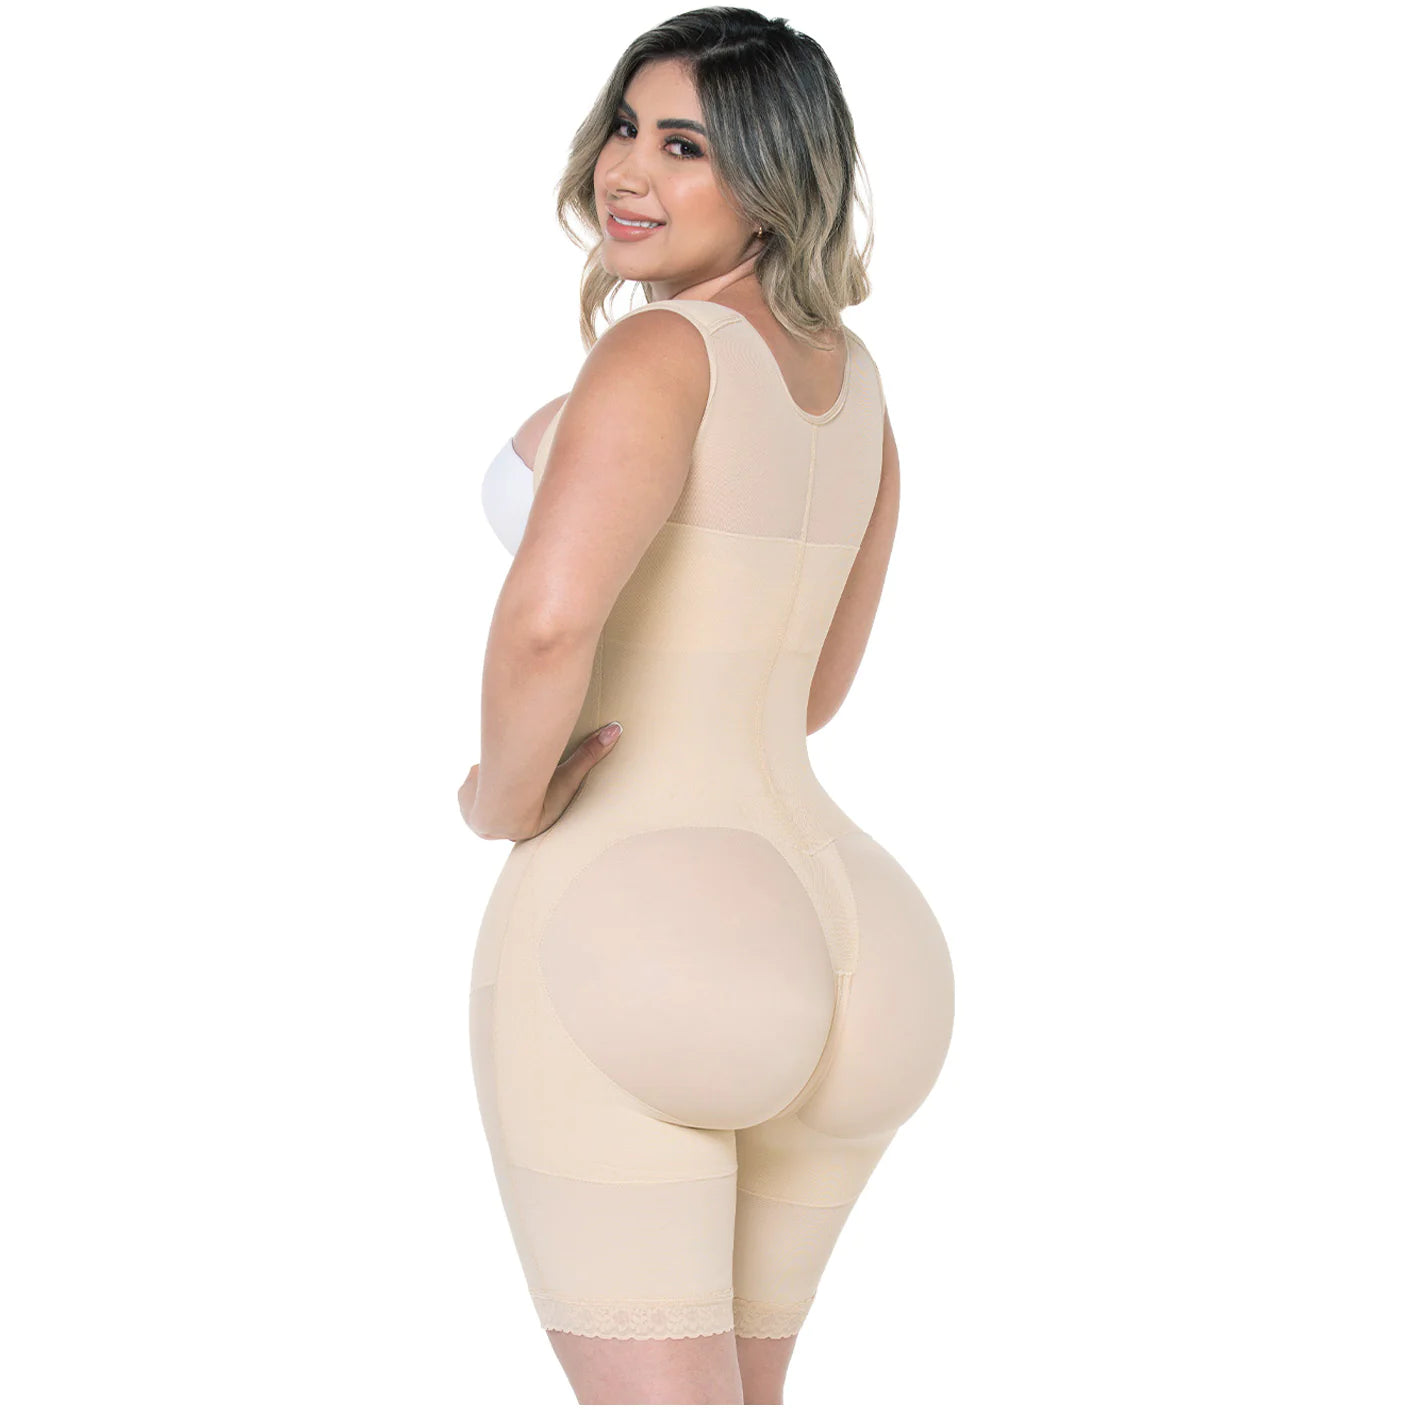 Fajas MYD 0489 | Fajas Colombianas Post Surgery Mid Thigh Shapewear Bodysuit for Guitar and Hourglass Body Types